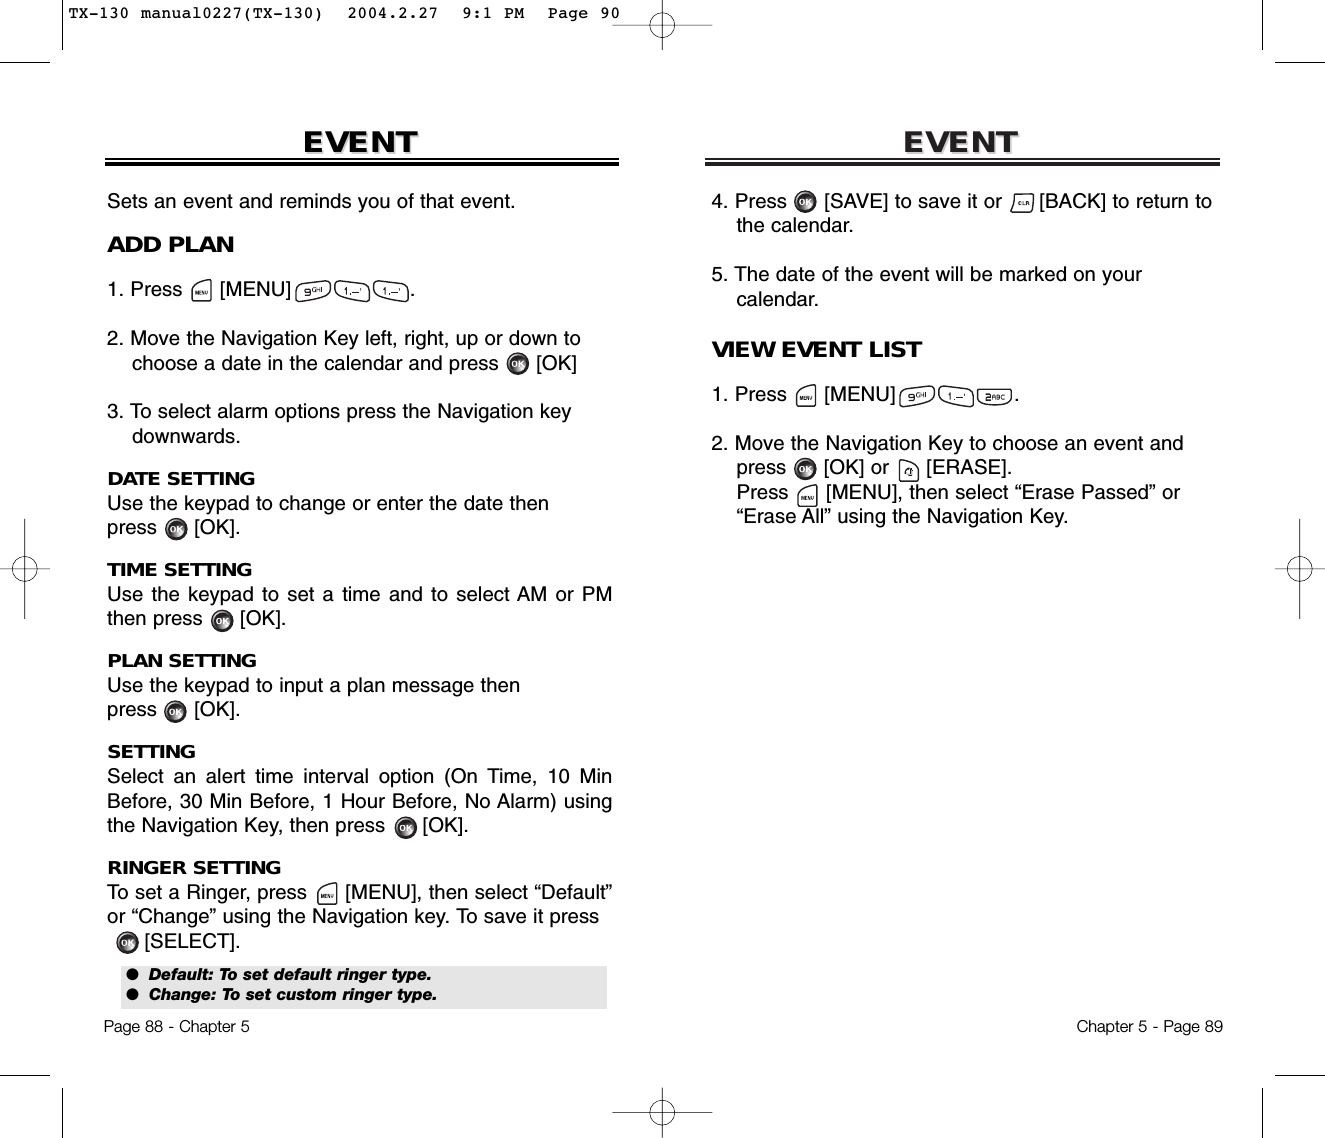 EVENTEVENTChapter 5 - Page 894. Press      [SAVE] to save it or      [BACK] to return to   the calendar.5. The date of the event will be marked on your calendar.VIEW EVENT LIST1. Press      [MENU]                   .2. Move the Navigation Key to choose an event and press [OK] or [ERASE].Press [MENU], then select “Erase Passed” or“Erase All” using the Navigation Key.EVENTEVENTPage 88 - Chapter 5Sets an event and reminds you of that event.ADD PLAN1. Press      [MENU]                   .2. Move the Navigation Key left, right, up or down tochoose a date in the calendar and press [OK]3. To select alarm options press the Navigation keydownwards.DATE SETTINGUse the keypad to change or enter the date then press      [OK].TIME SETTINGUse the keypad to set a time and to select AM or PMthen press      [OK].PLAN SETTINGUse the keypad to input a plan message then press      [OK].SETTINGSelect an alert time interval option (On Time, 10 MinBefore, 30 Min Before, 1 Hour Before, No Alarm) usingthe Navigation Key, then press      [OK].RINGER SETTINGTo set a Ringer, press      [MENU], then select “Default”or “Change” using the Navigation key. To save it press[SELECT].●  Default: To set default ringer type.●  Change: To set custom ringer type.TX-130 manual0227(TX-130)  2004.2.27  9:1 PM  Page 90